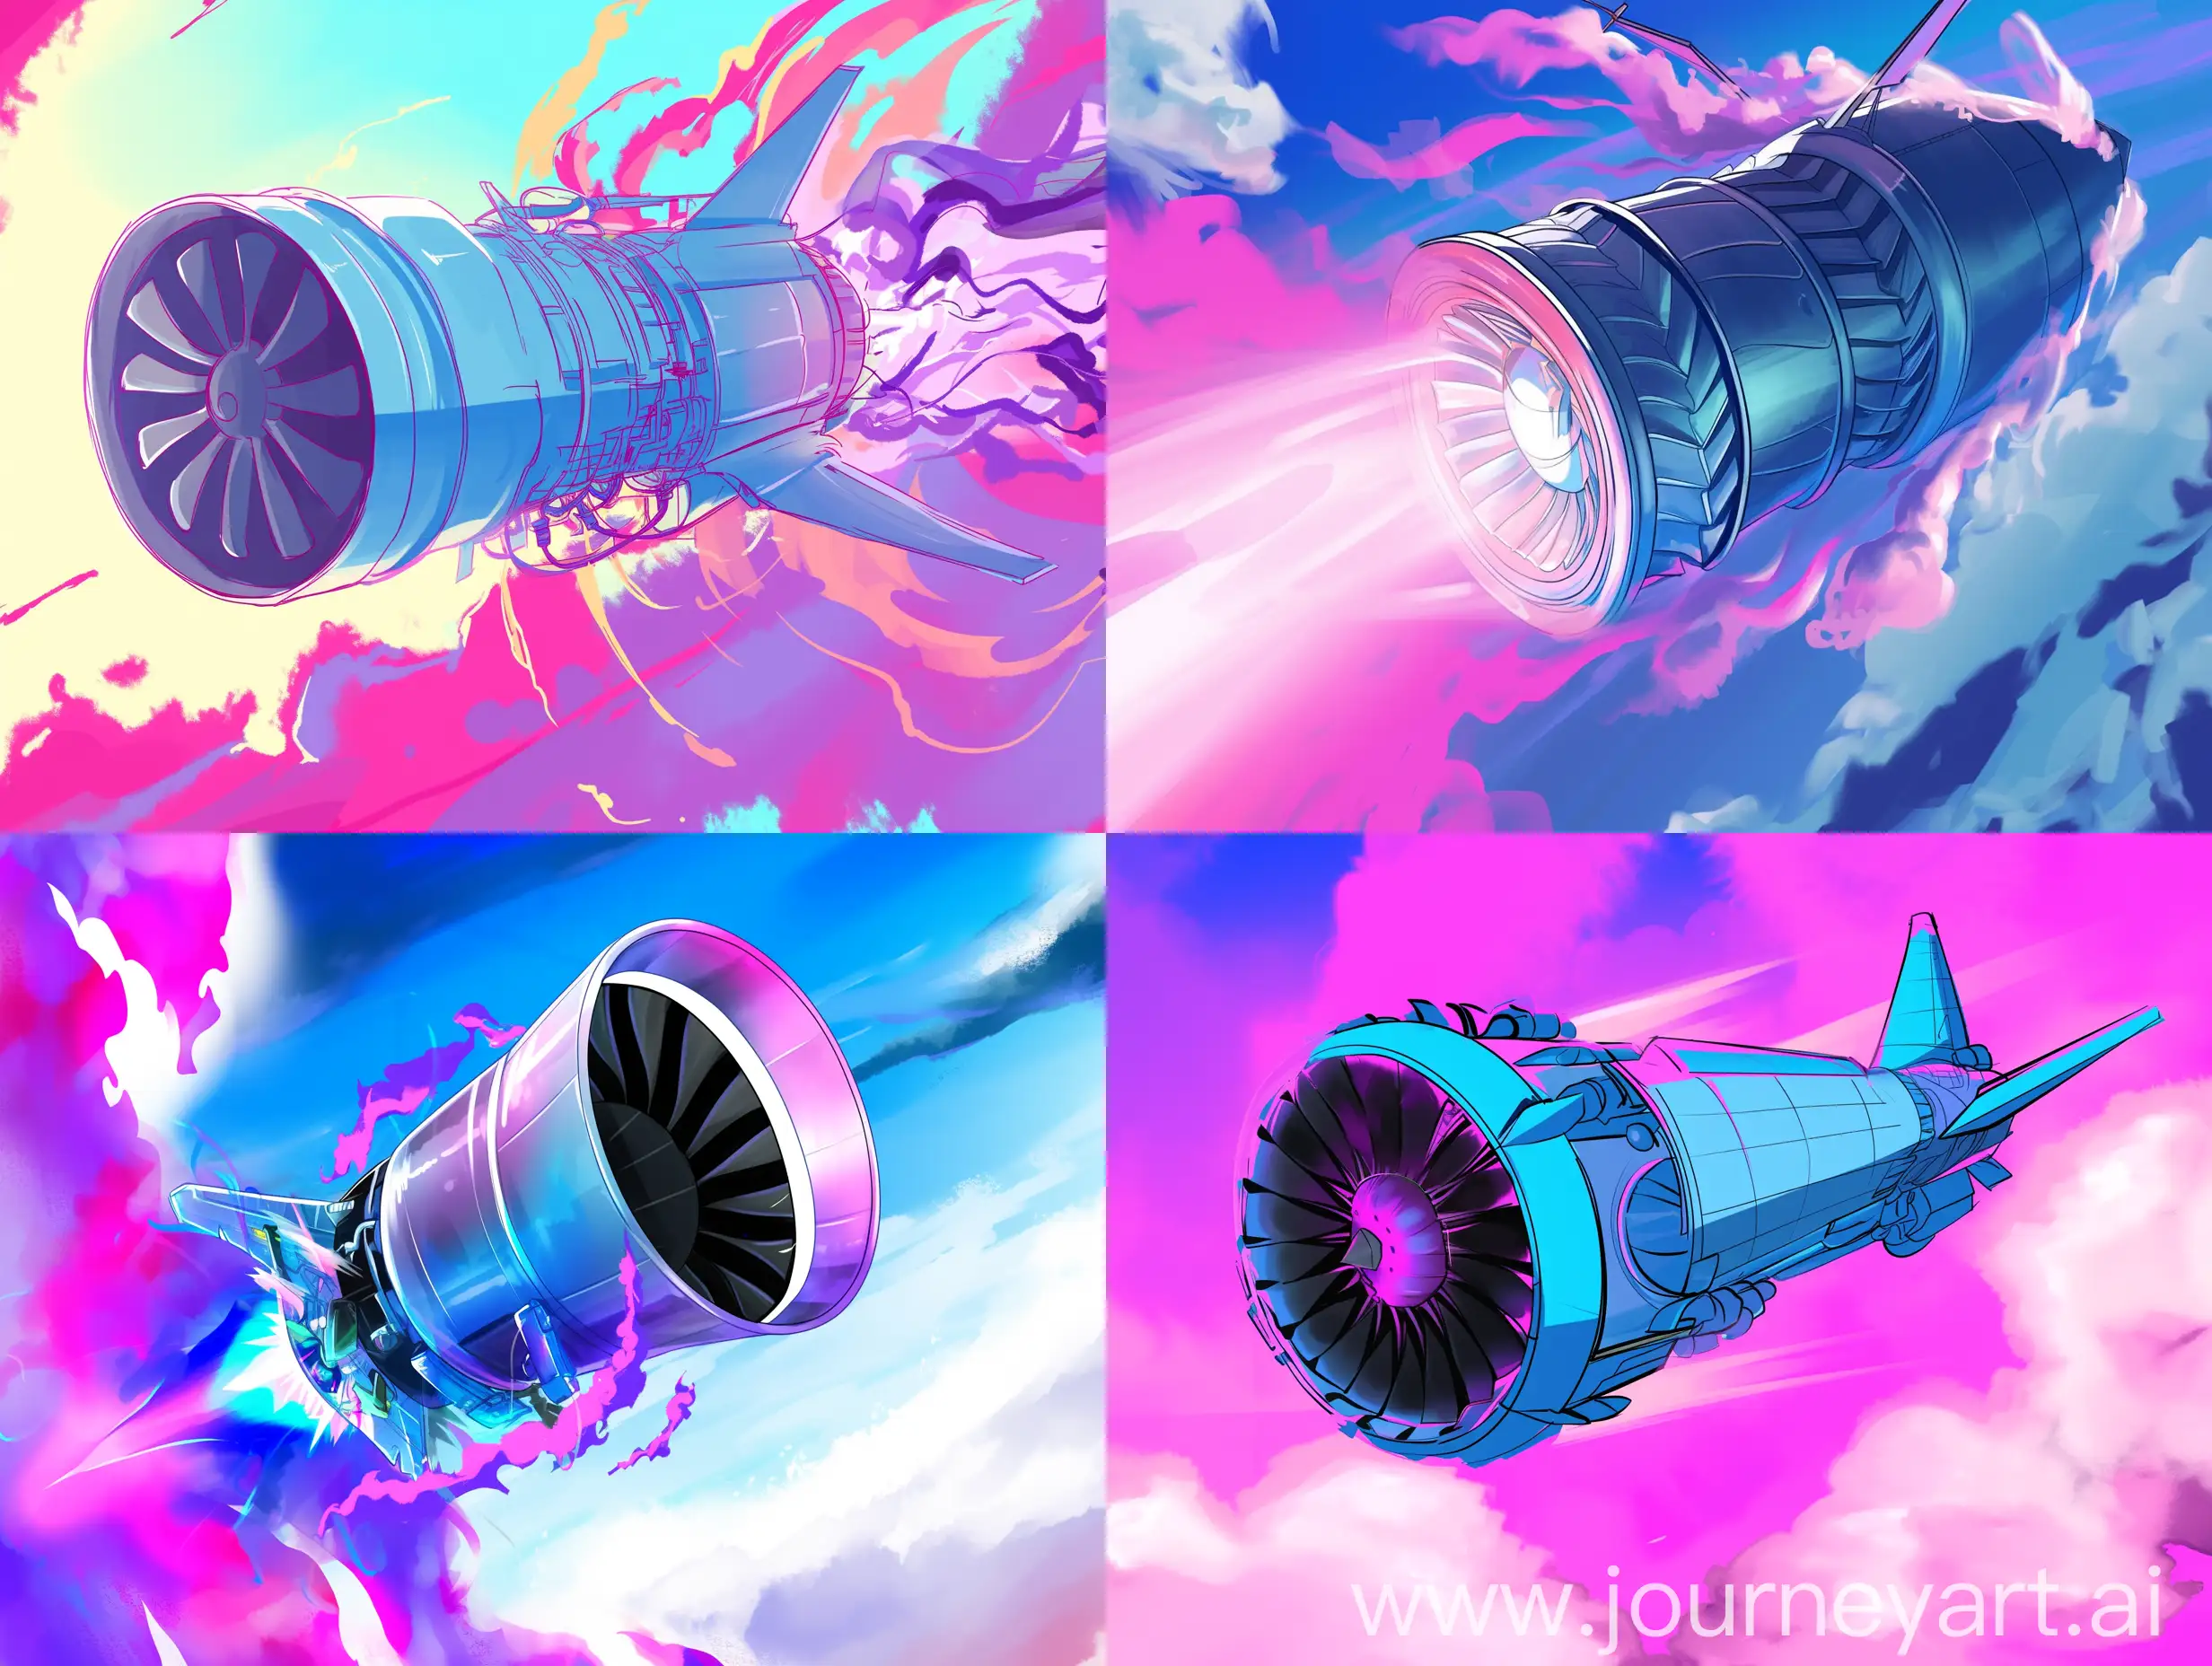 Energetic-Jet-Engine-in-Anime-Drawing-Style-Dynamic-Blue-and-Cheerful-Colors